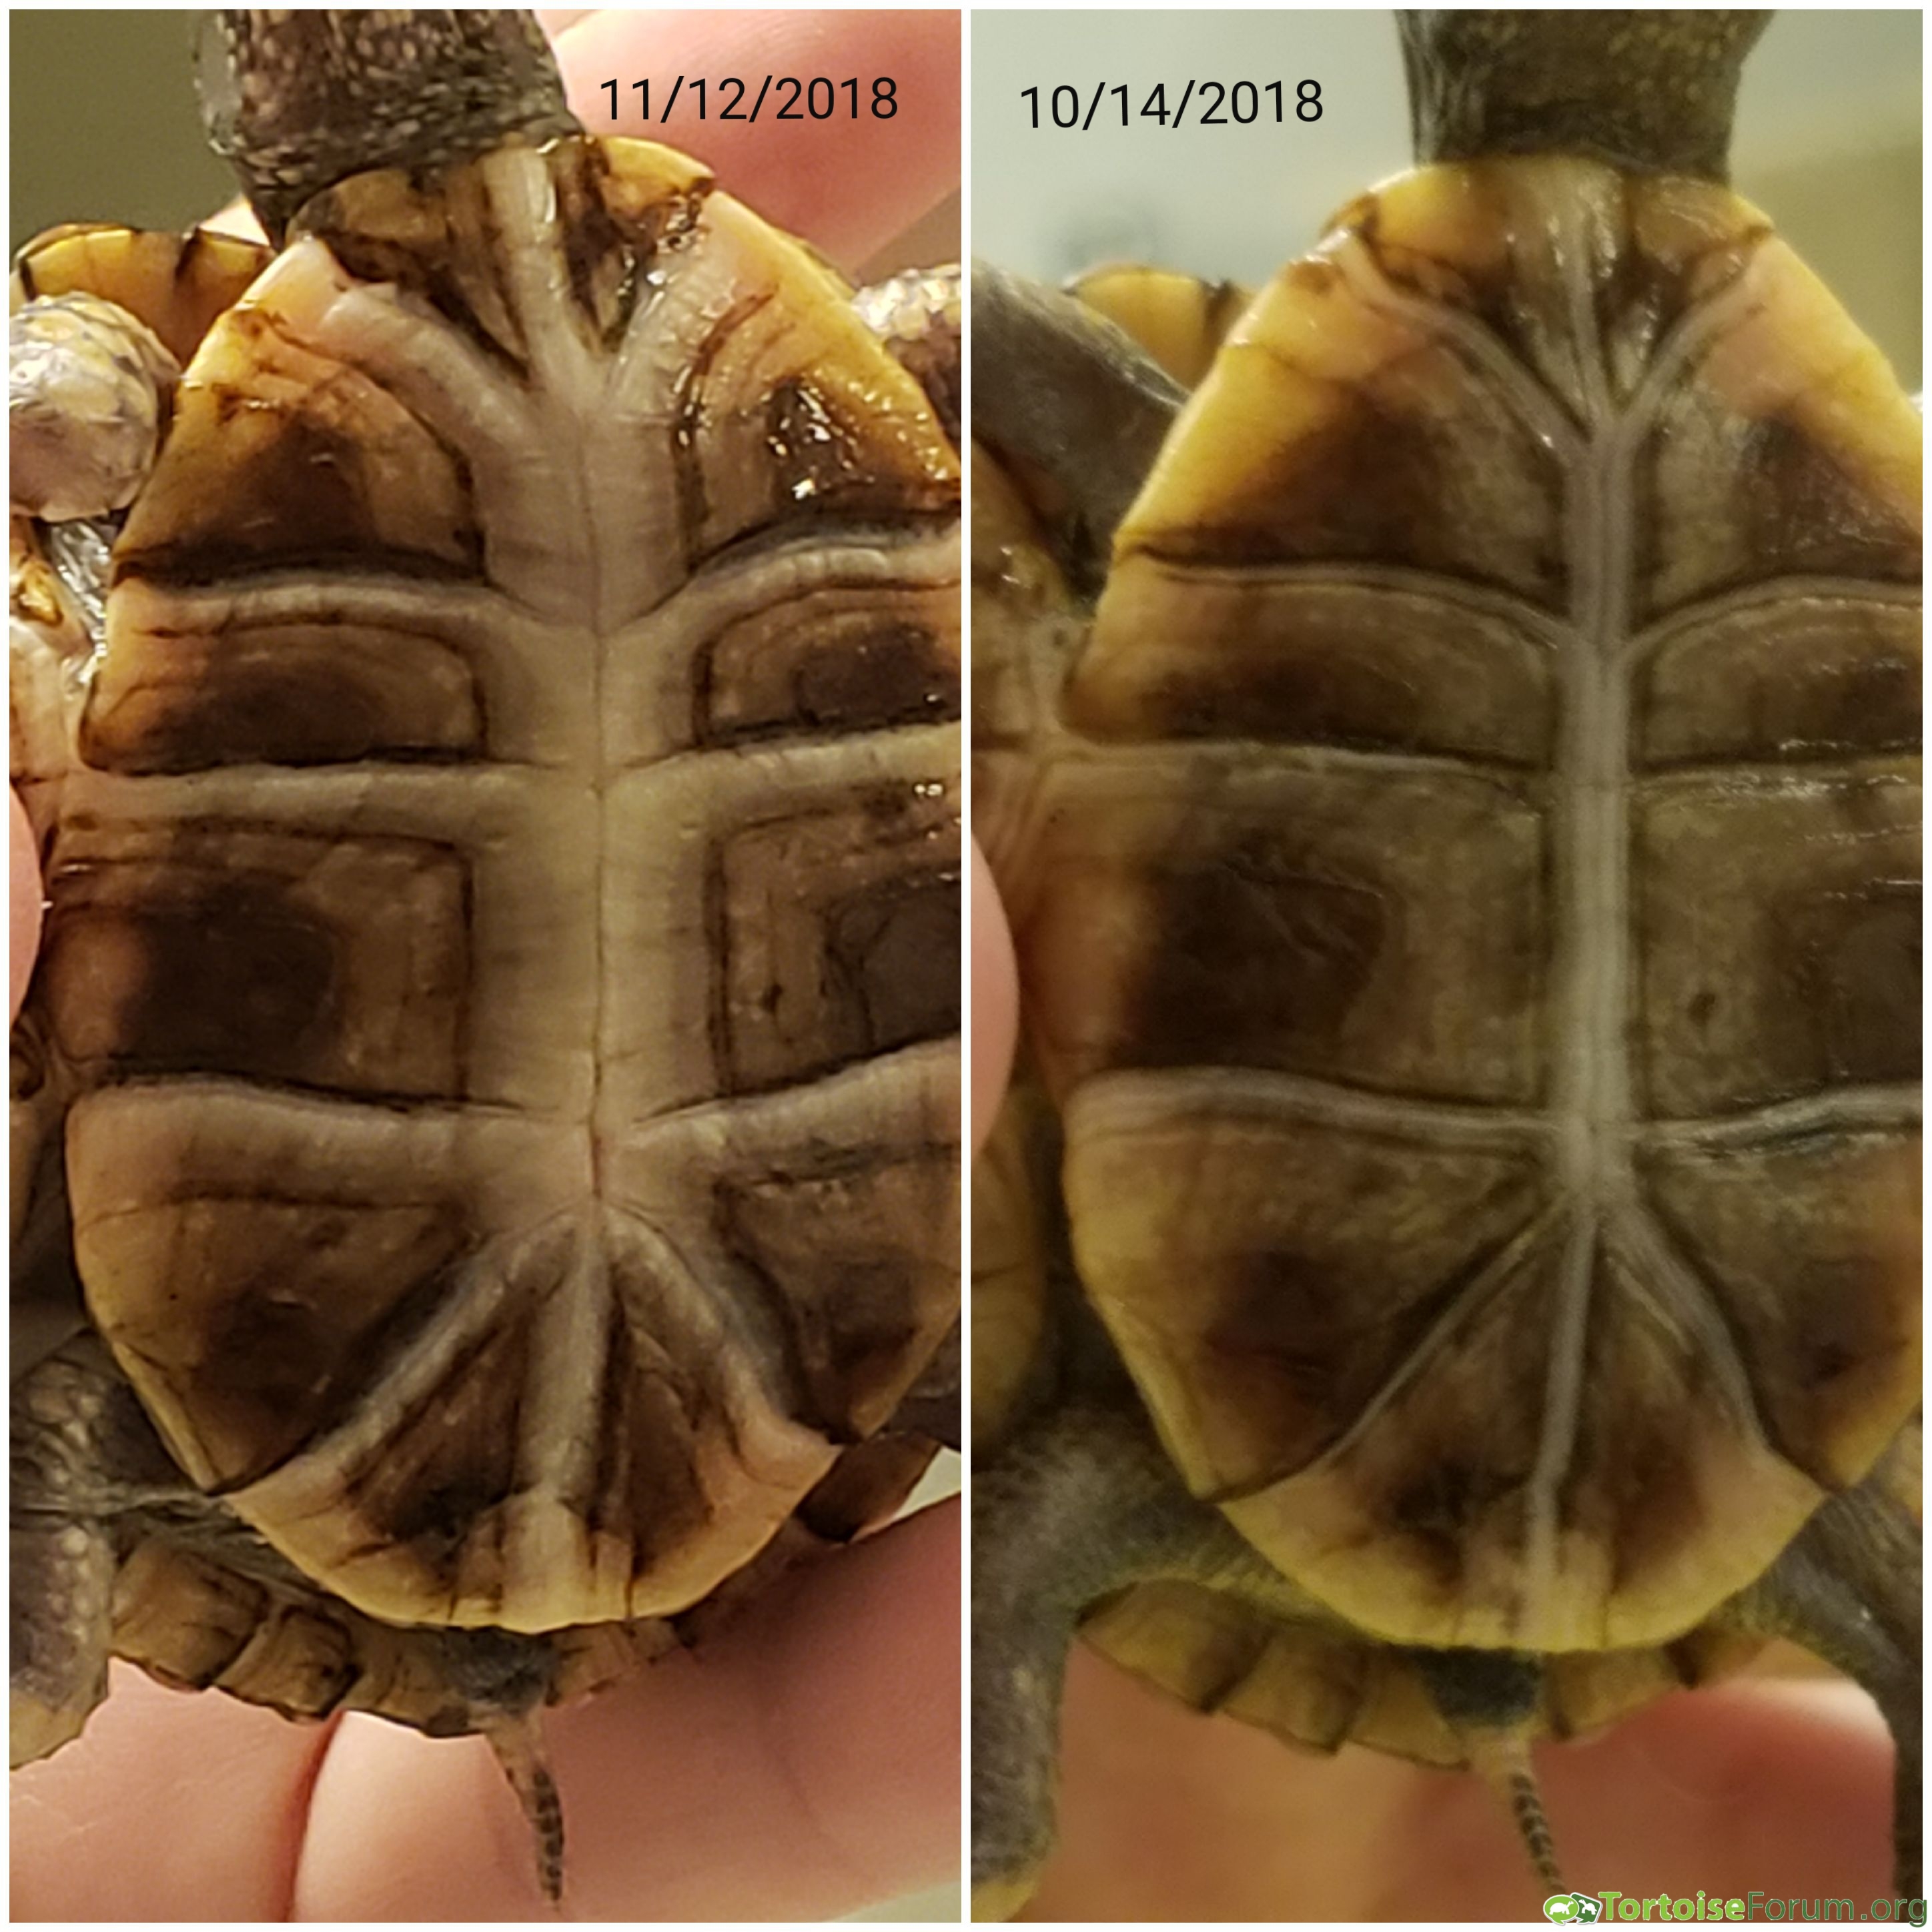 Growth from October to November